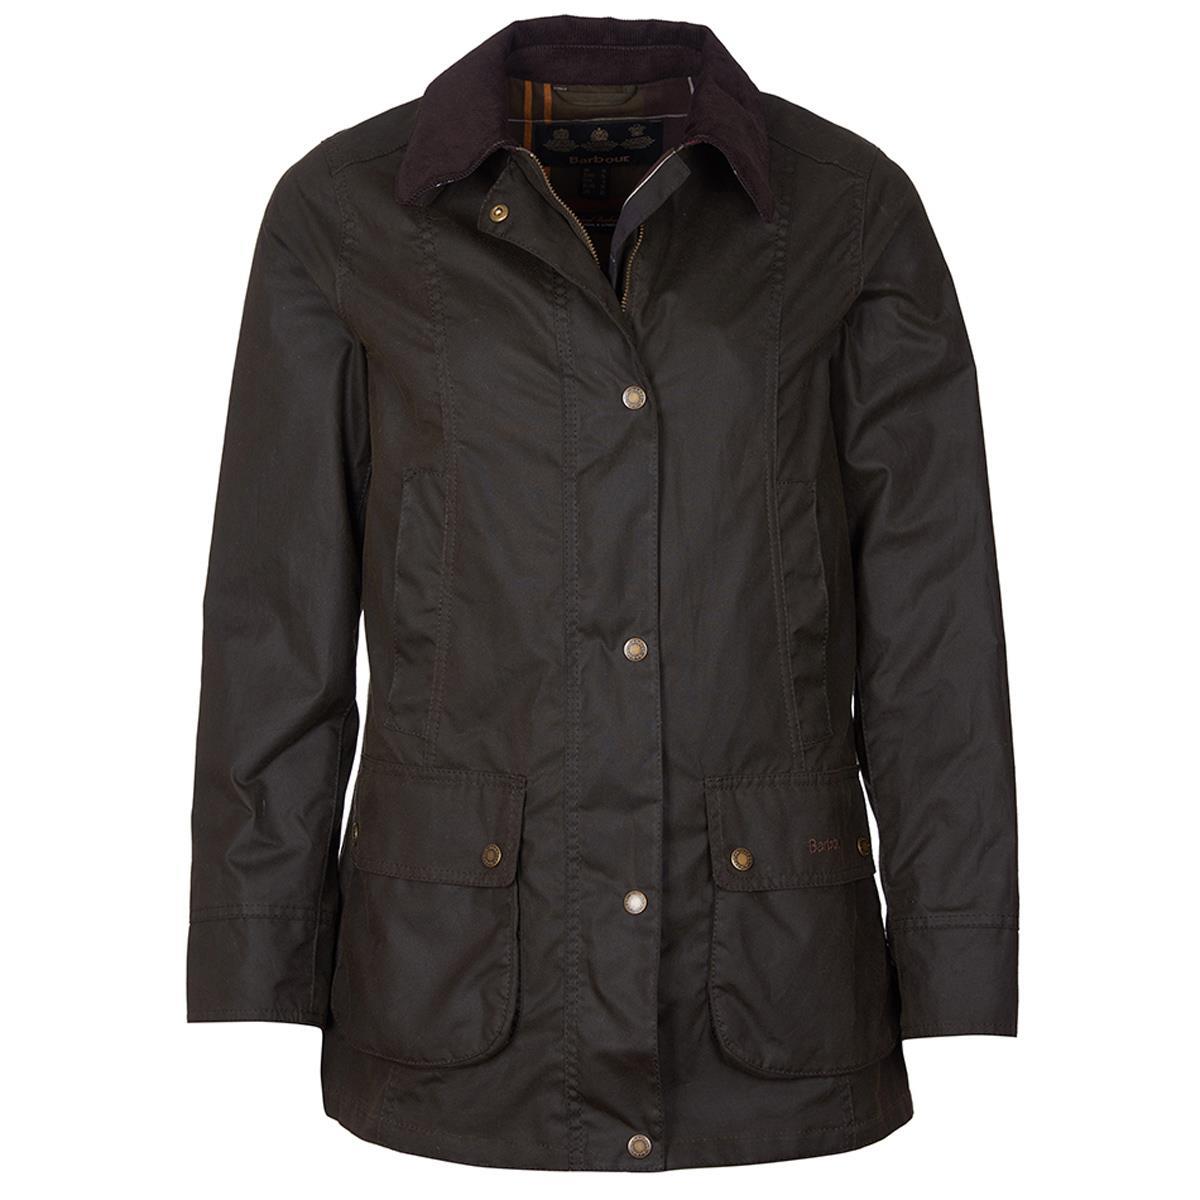 What material is the Barbour Fiddich Women's Wax Jacket made of?